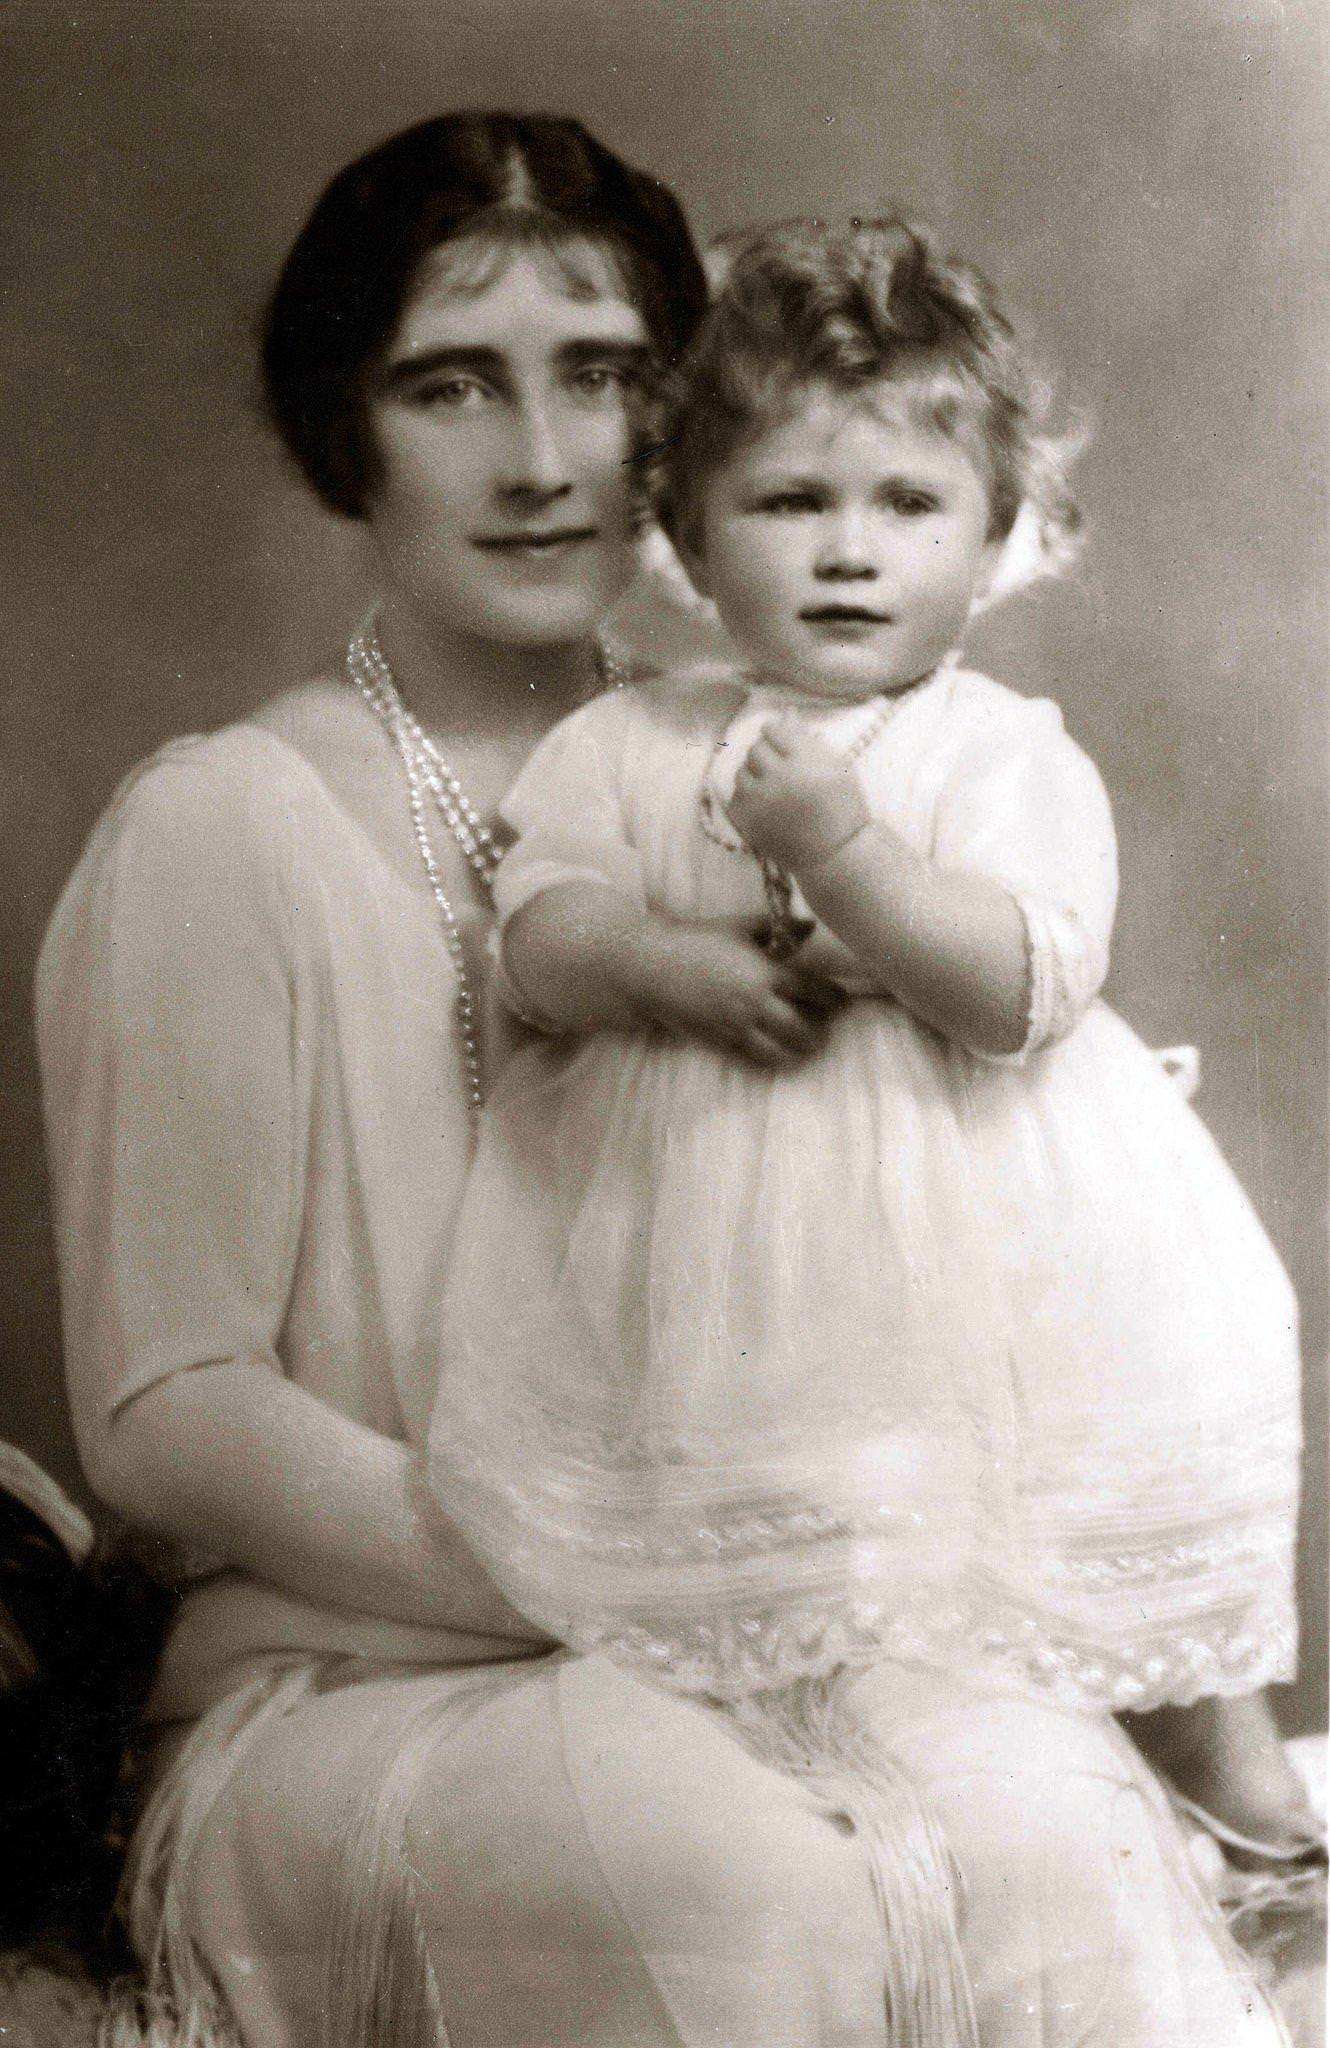 The Queen Mother pictured when she was H.R.H. the Duchess of York with her daughter Princess Elizabeth, June 1927.